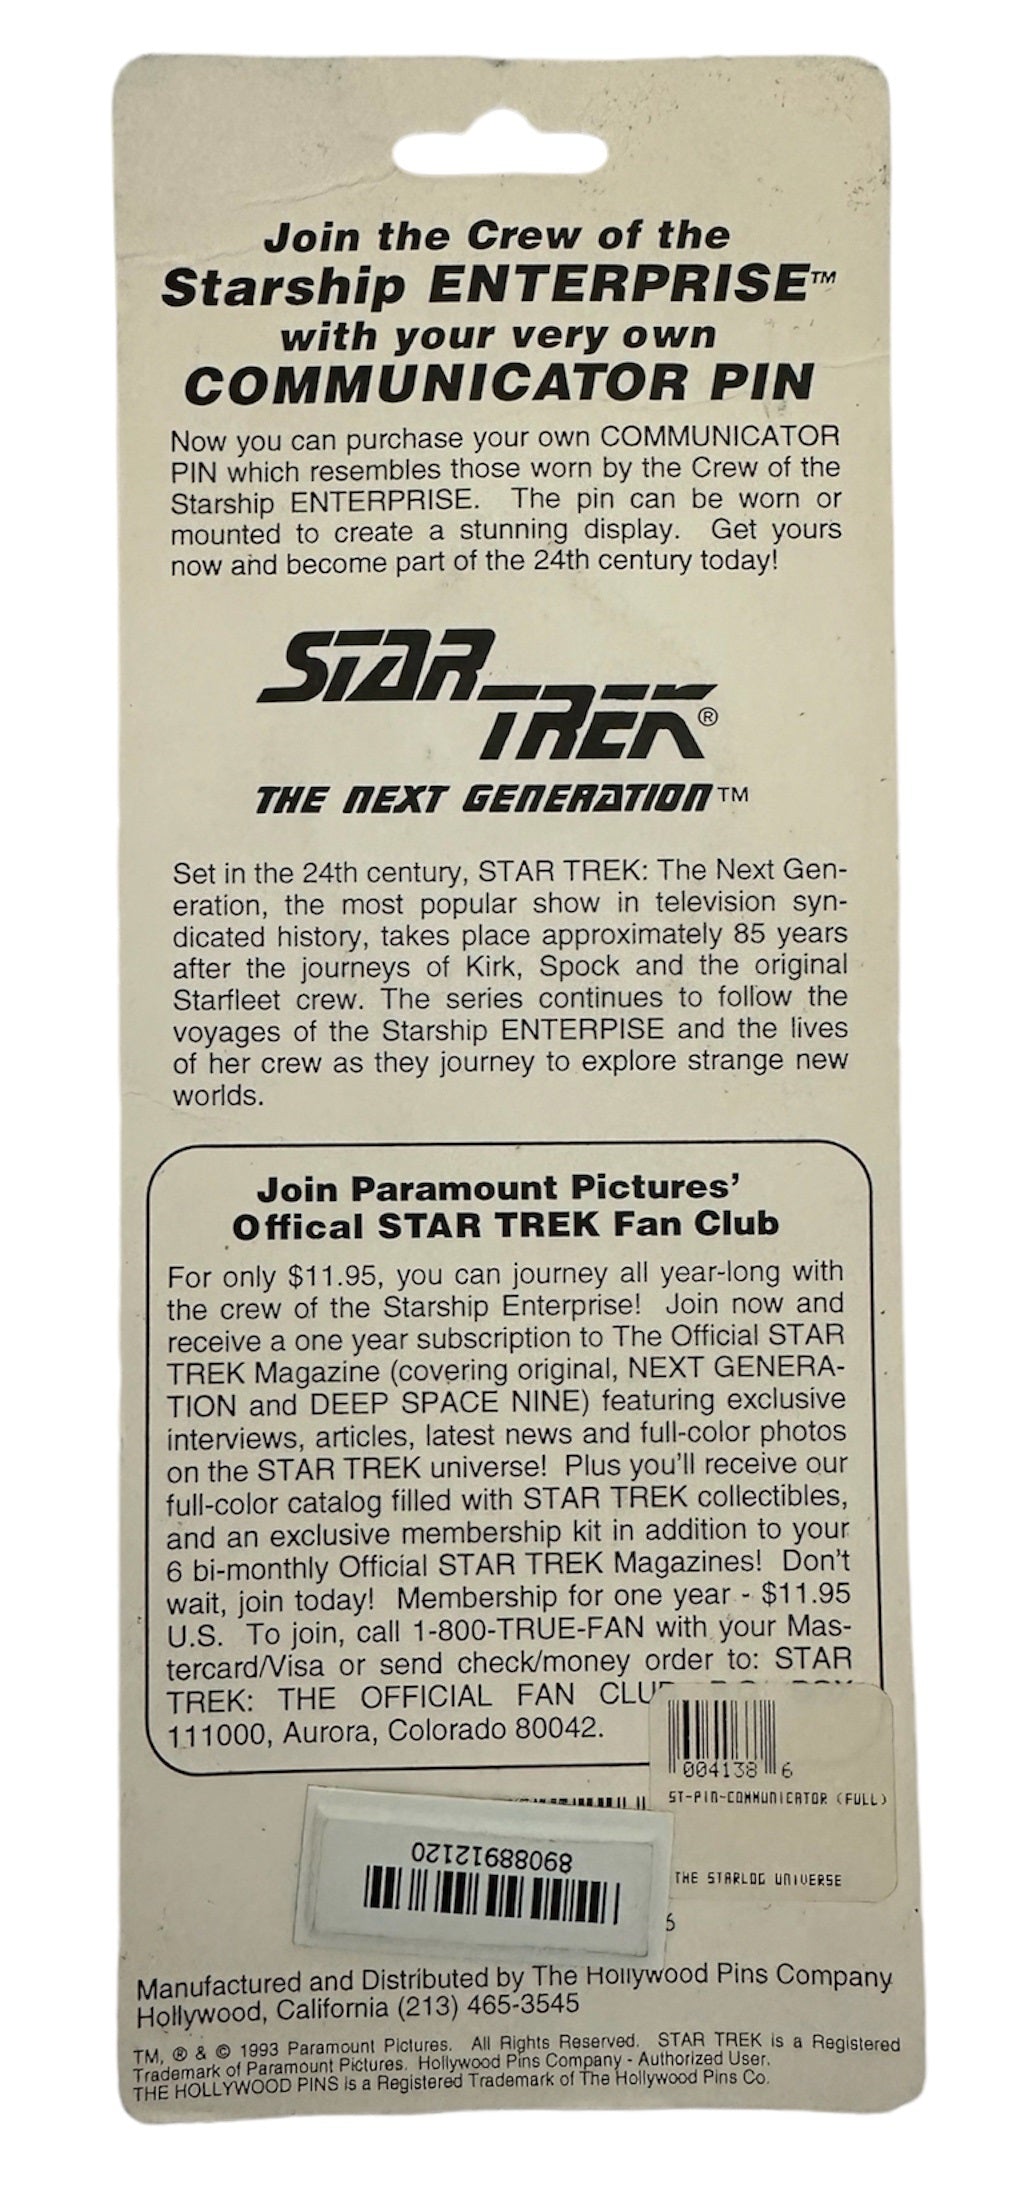 Vintage 1993 Hollywood Pins - Star Trek The Next Generation Collectors Edition Starfleet Communicator Pin Badge - Factory Sealed Shop Stock Room Find